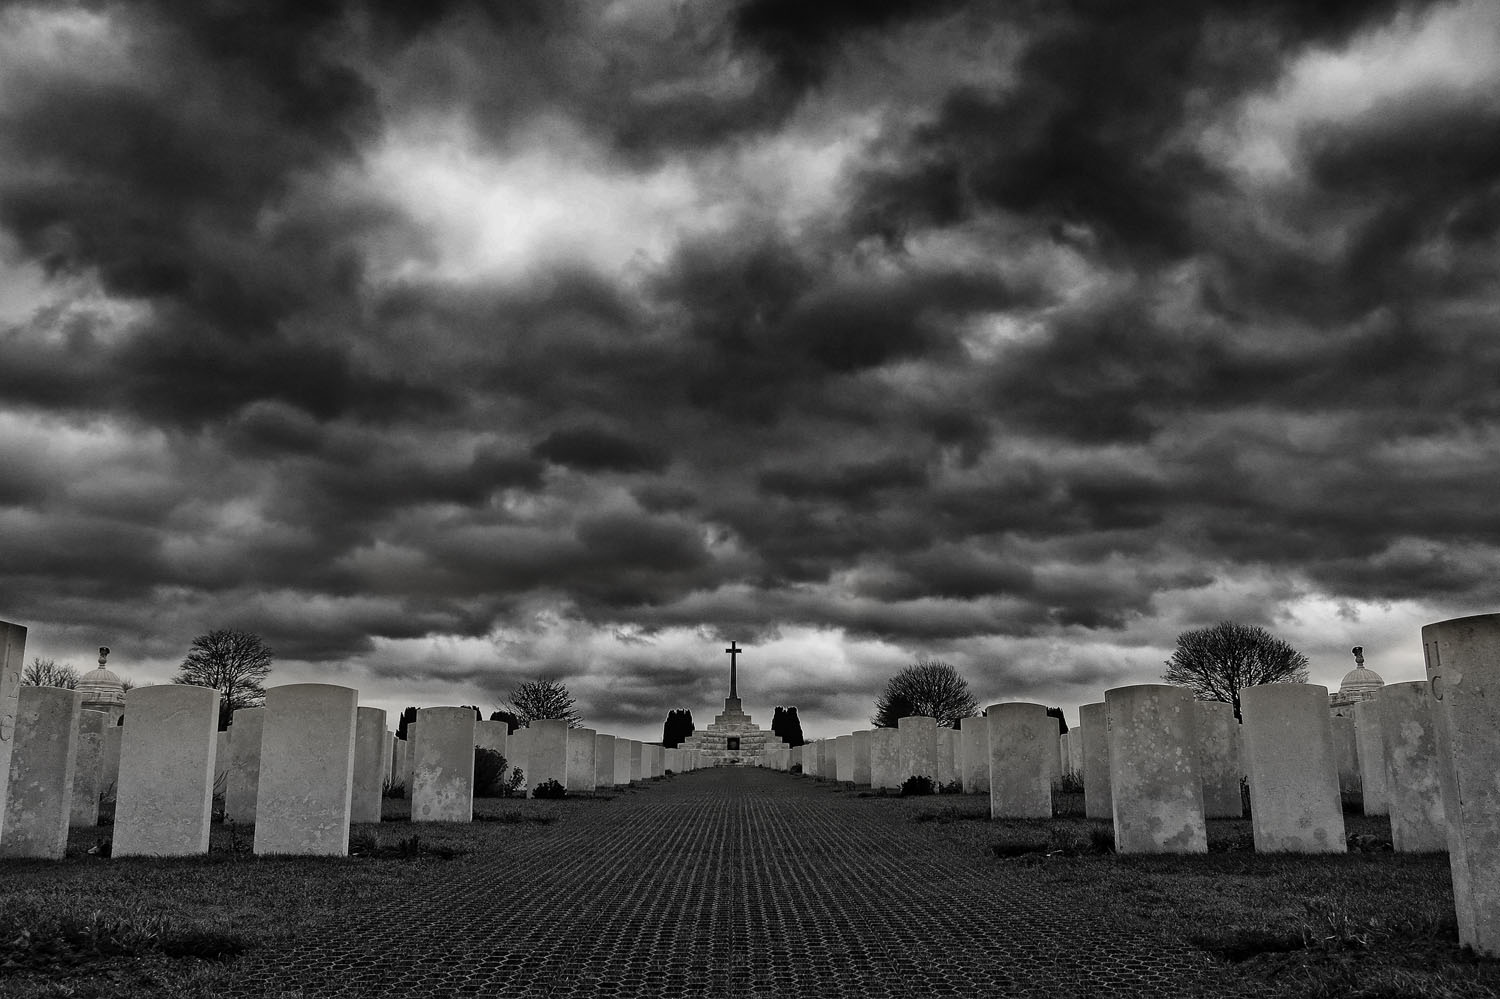 ypres tyne cot_low key i think for top then high structure bottom.jpg